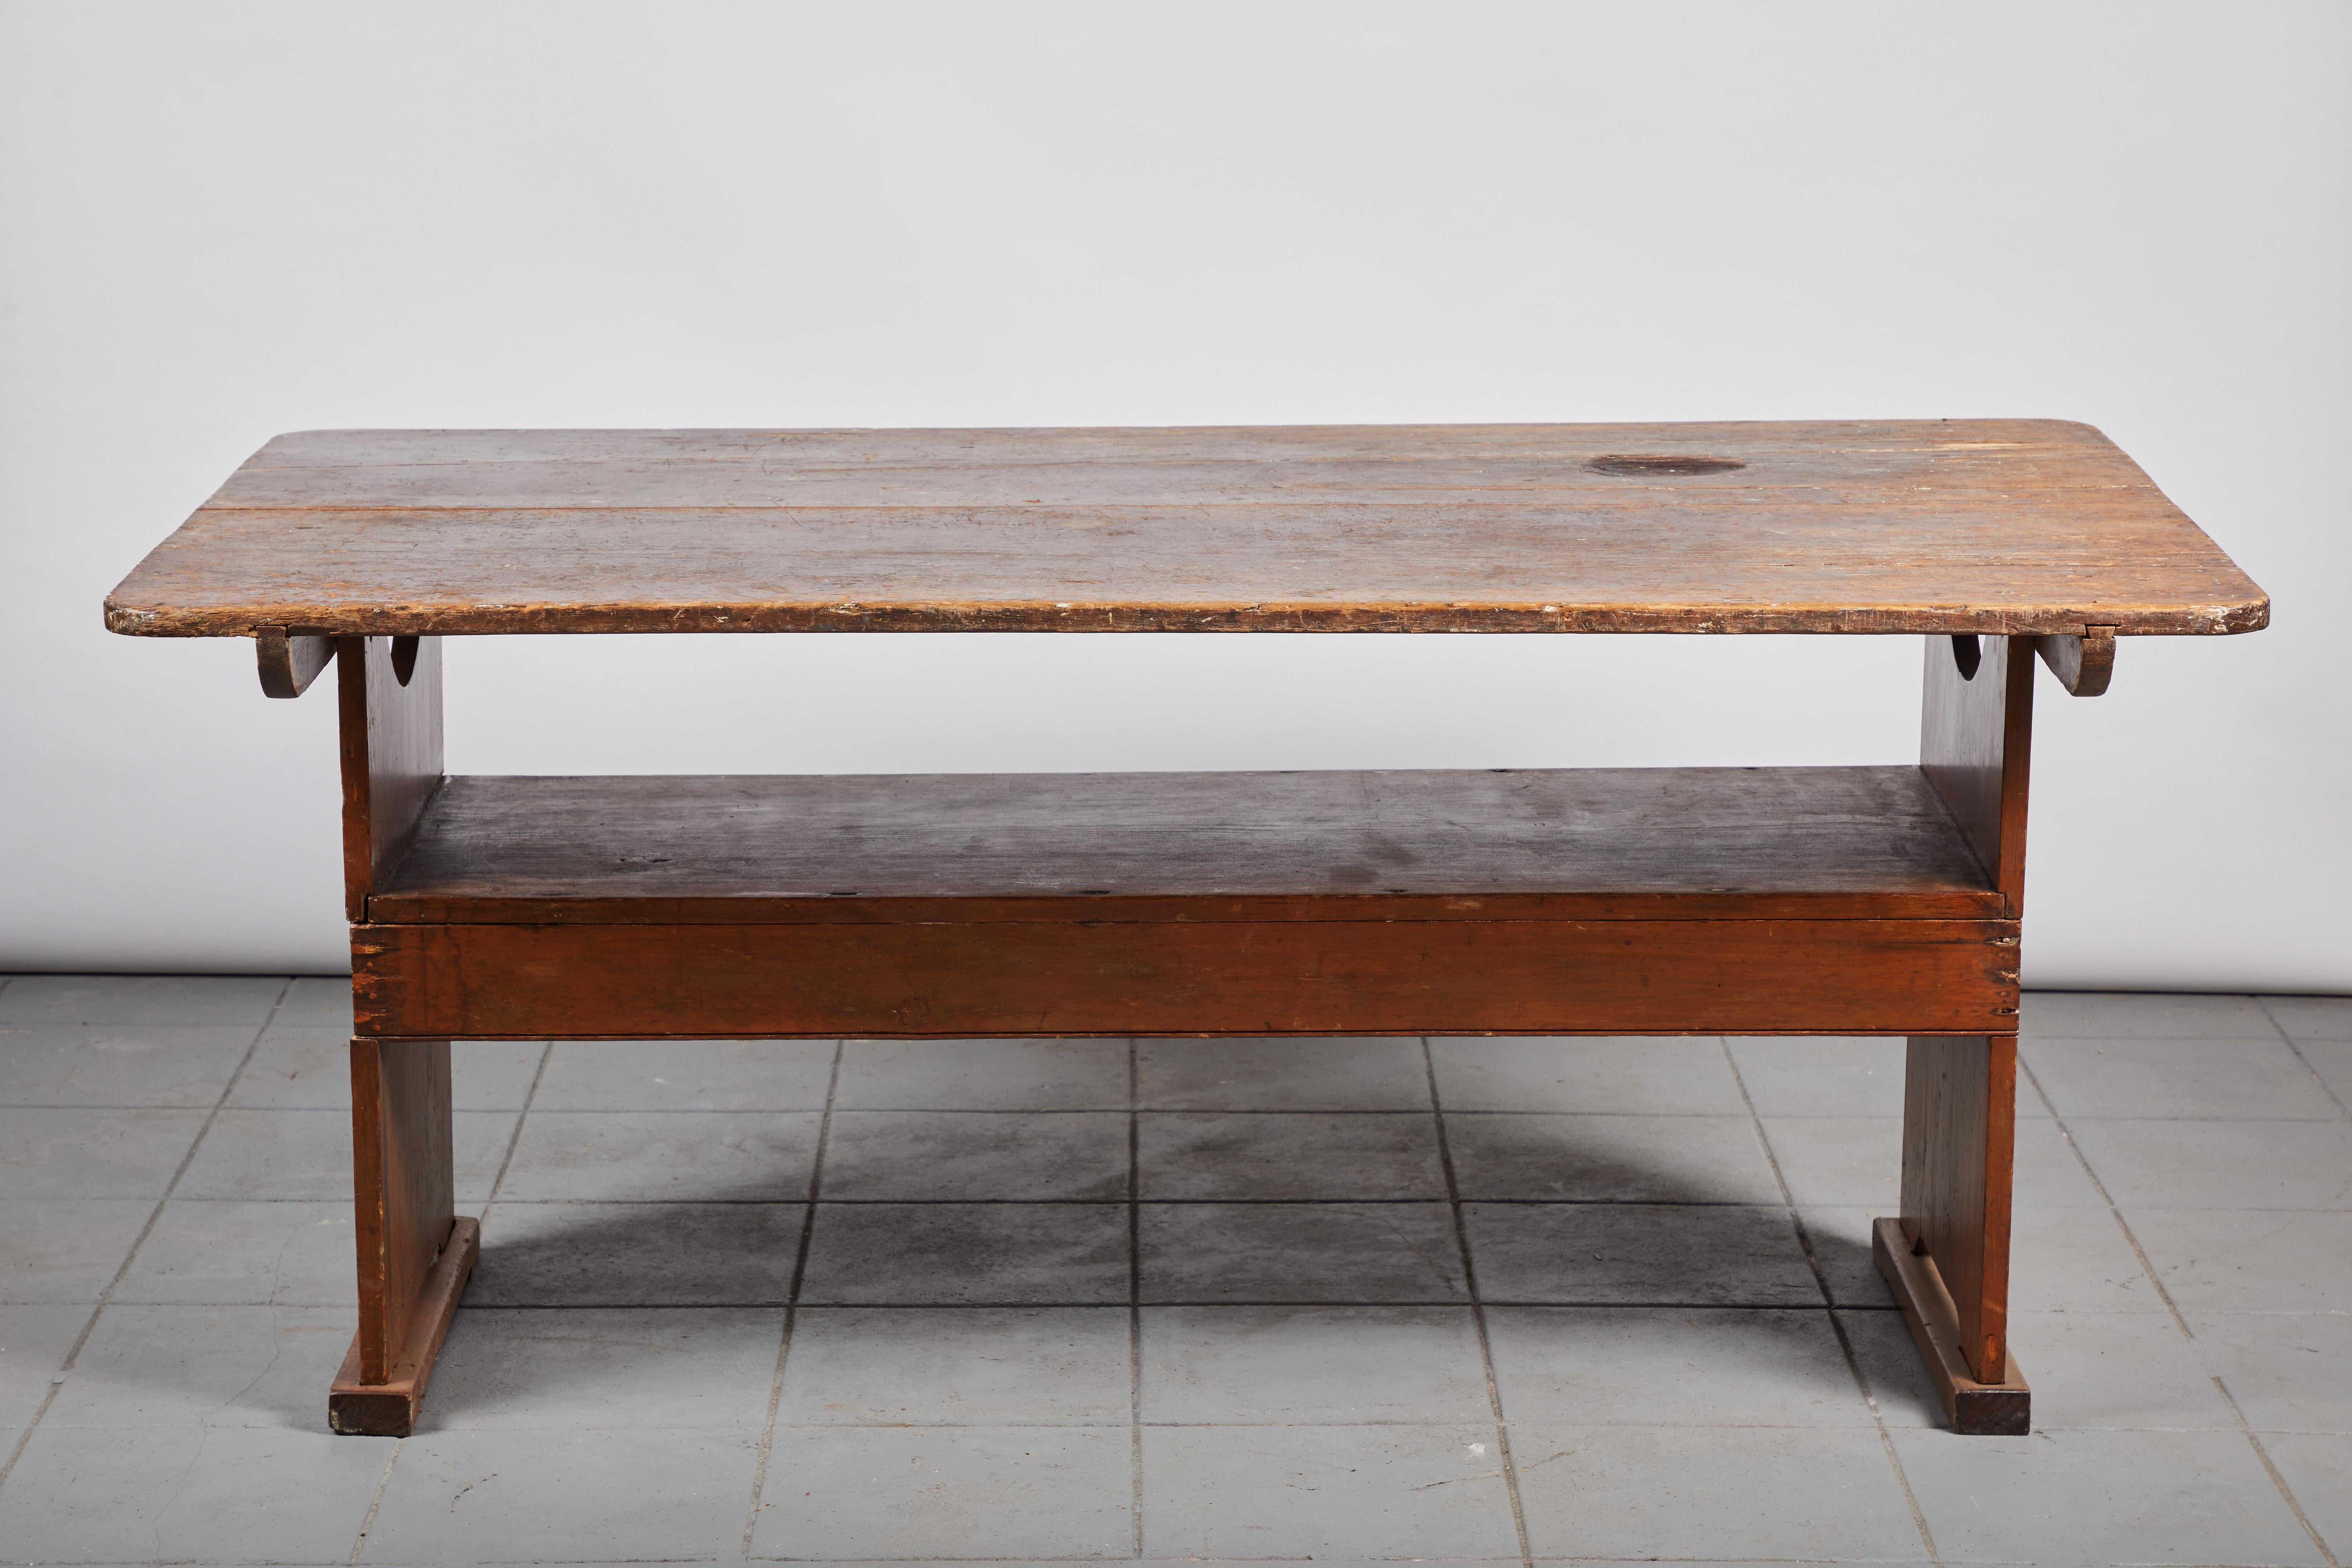 Early American Shaker dining table that pivots up to be a bench. The bench has a seat height of 18